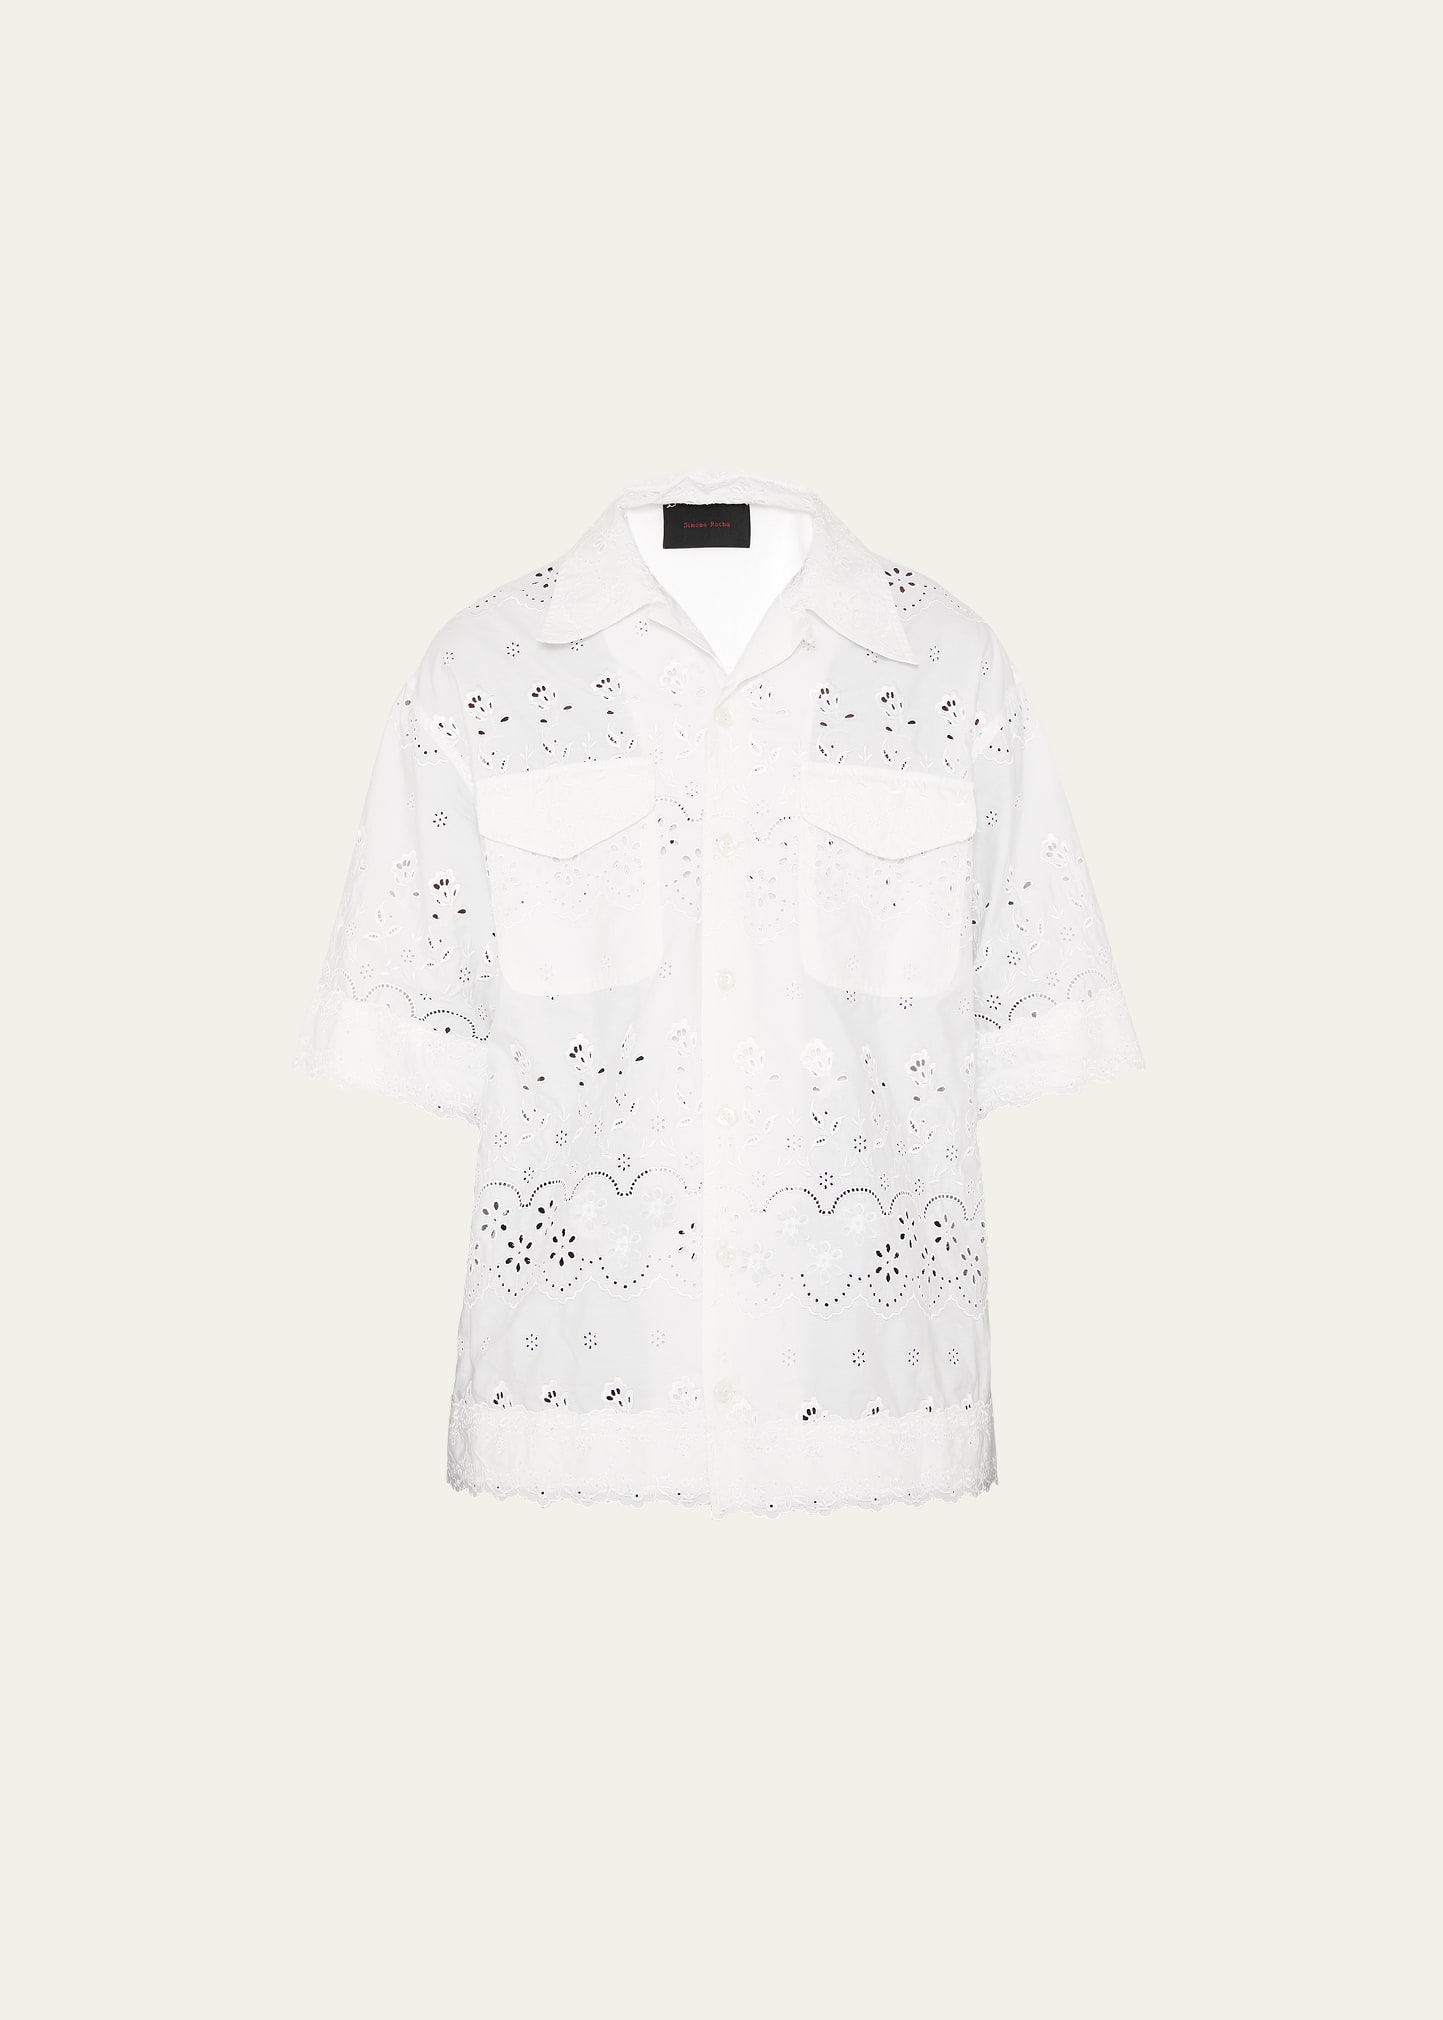 Men's Broderie Anglaise Relaxed Camp Shirt